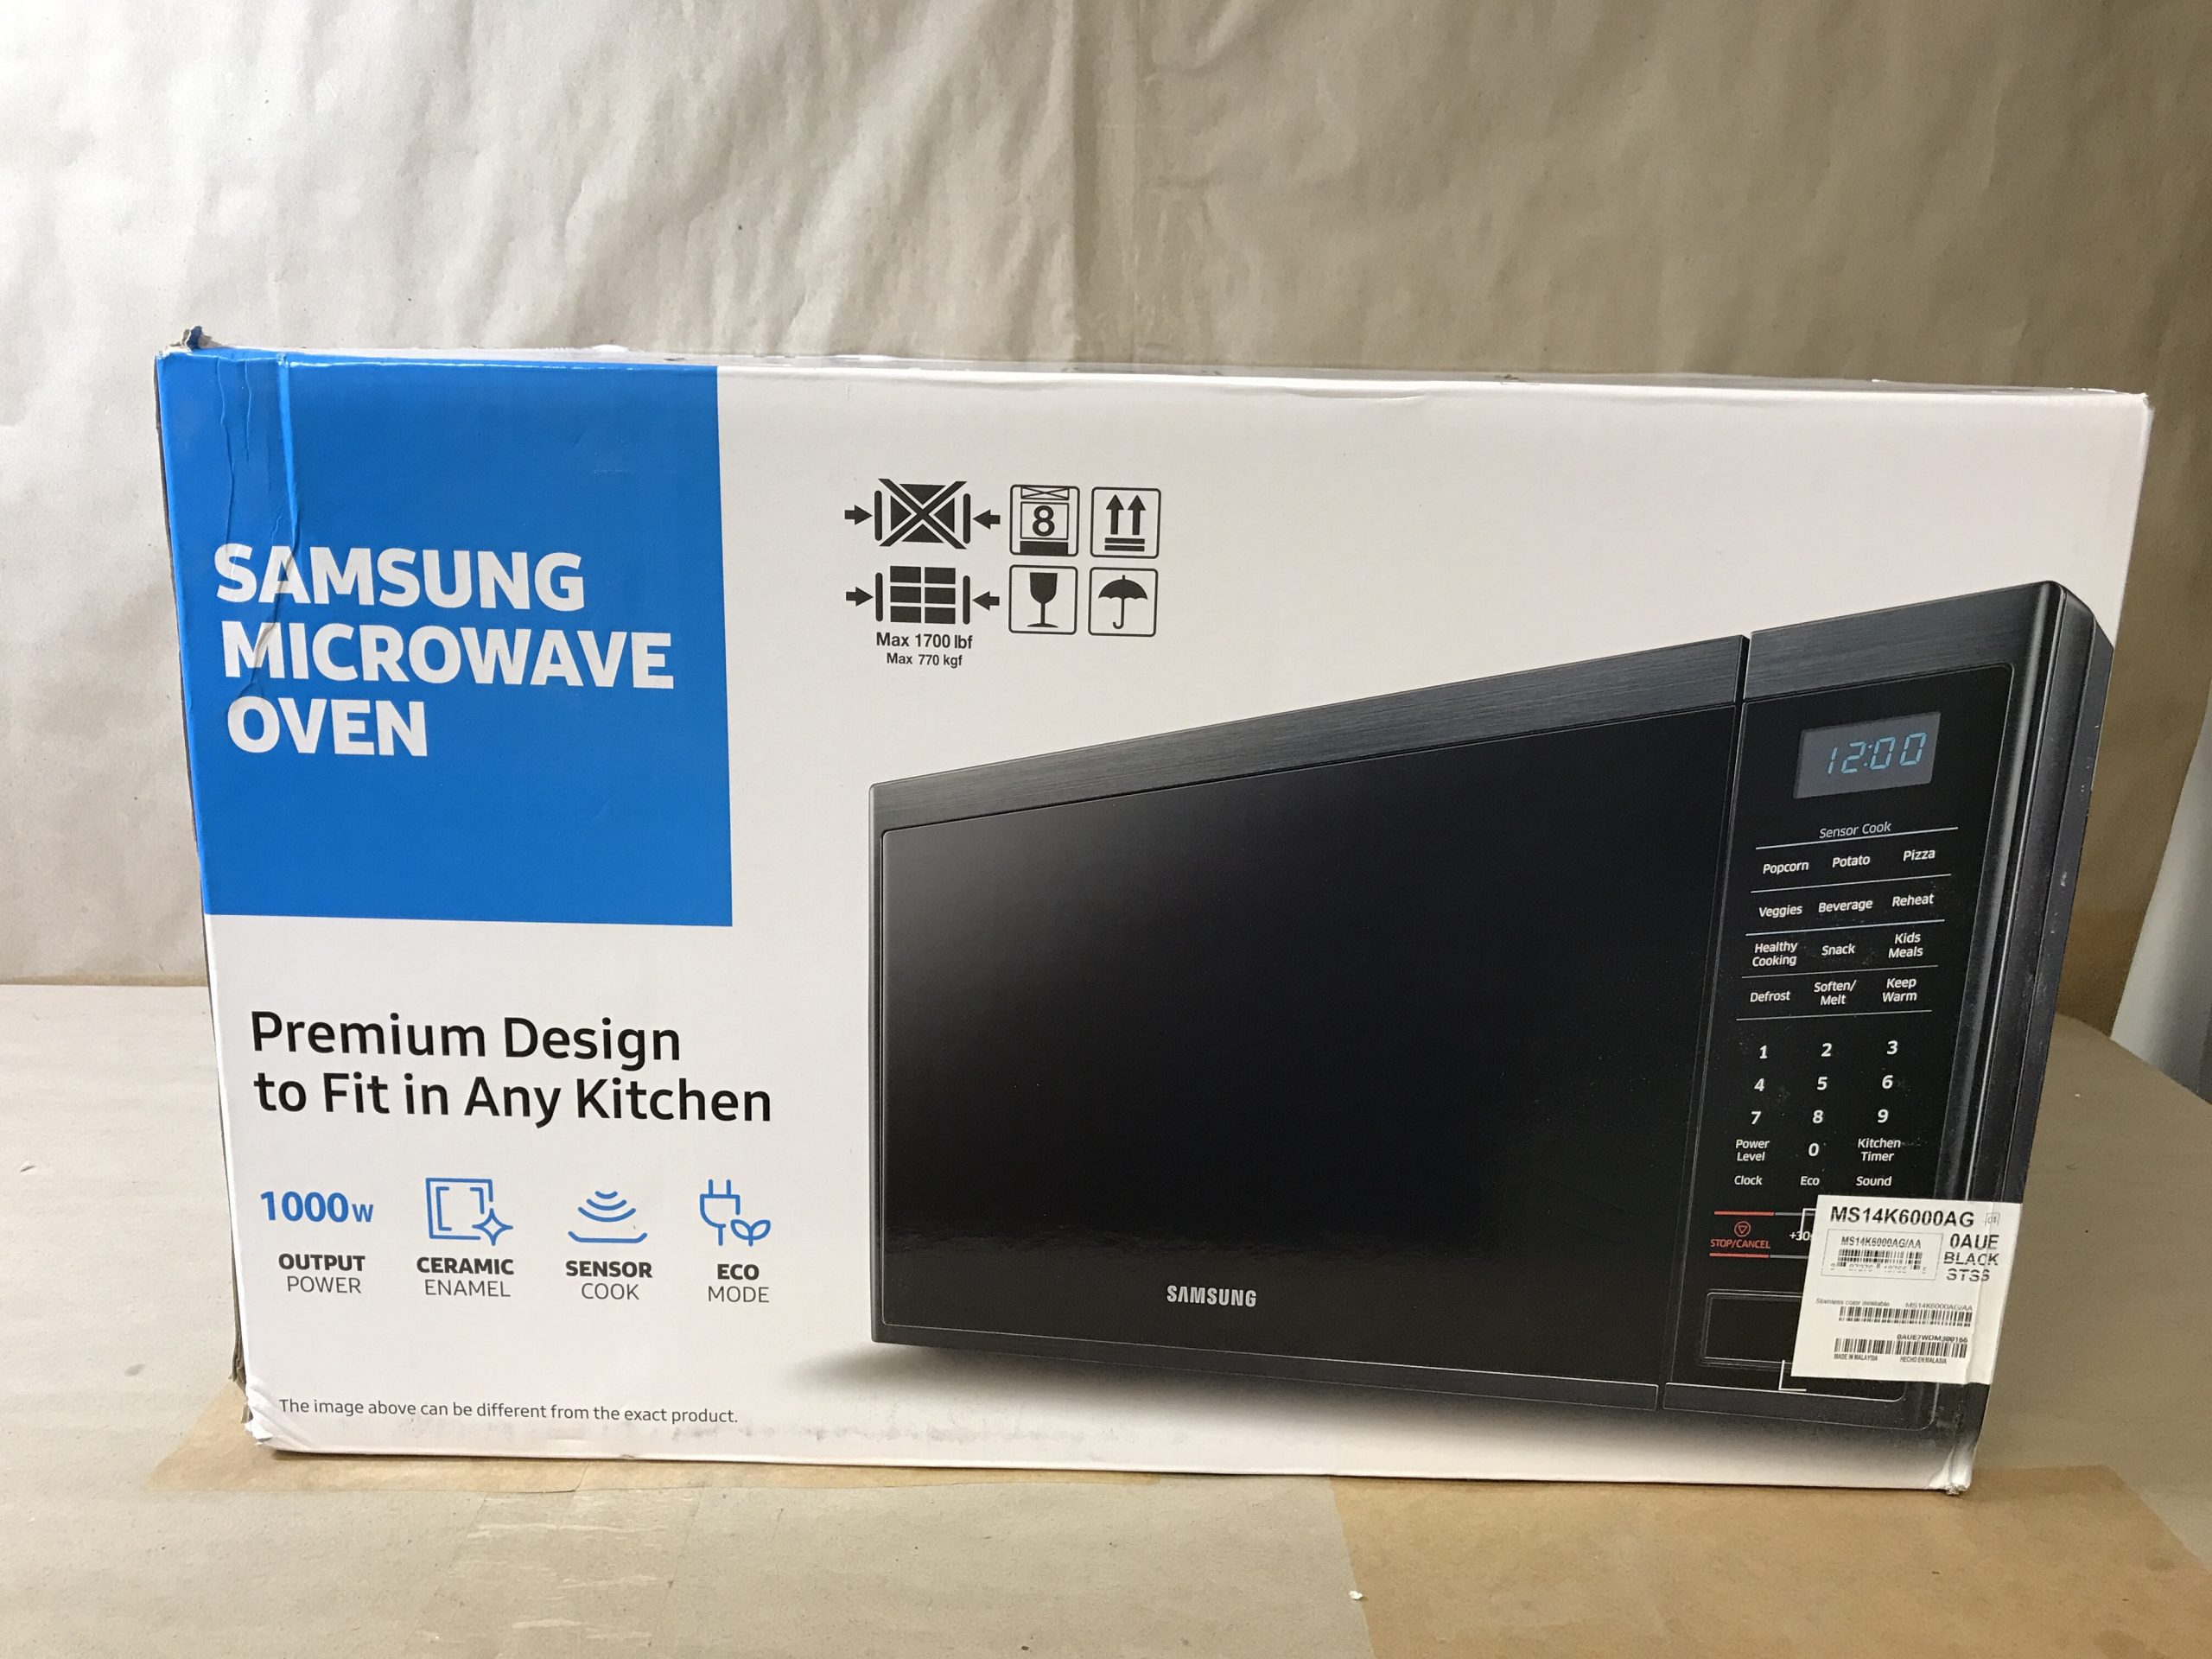 https://bstock.net/wp-content/uploads/2021/06/samsung20microwave1.04.4220PM-scaled.jpg